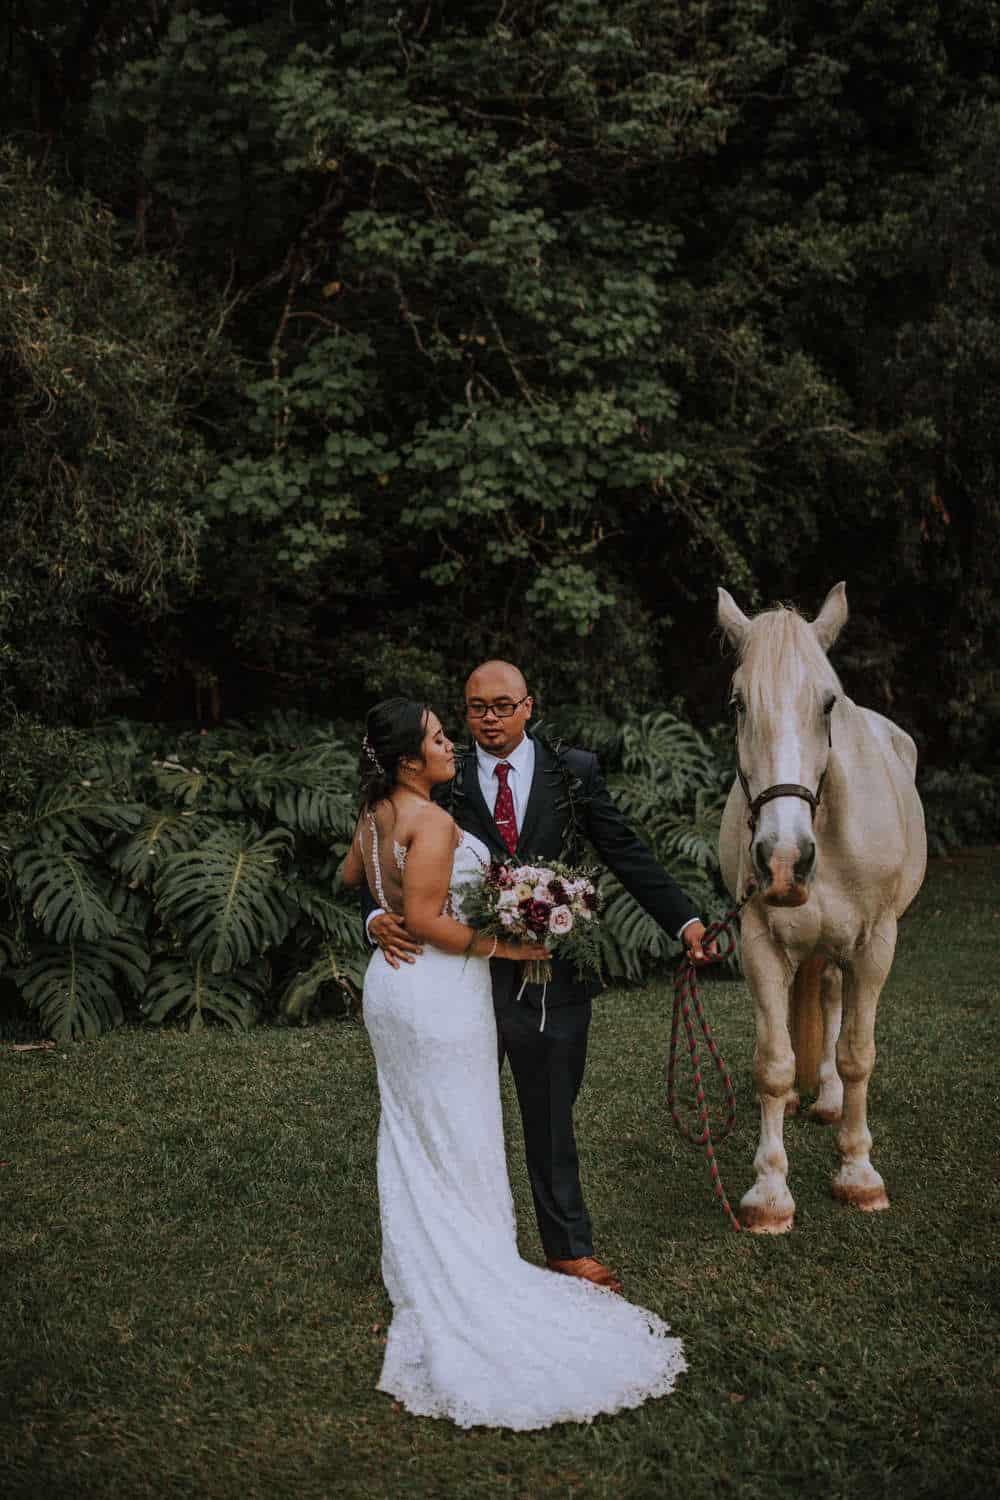 Bride and groom wedding day portraits at Sunset Ranch | Anela Benavides Photography